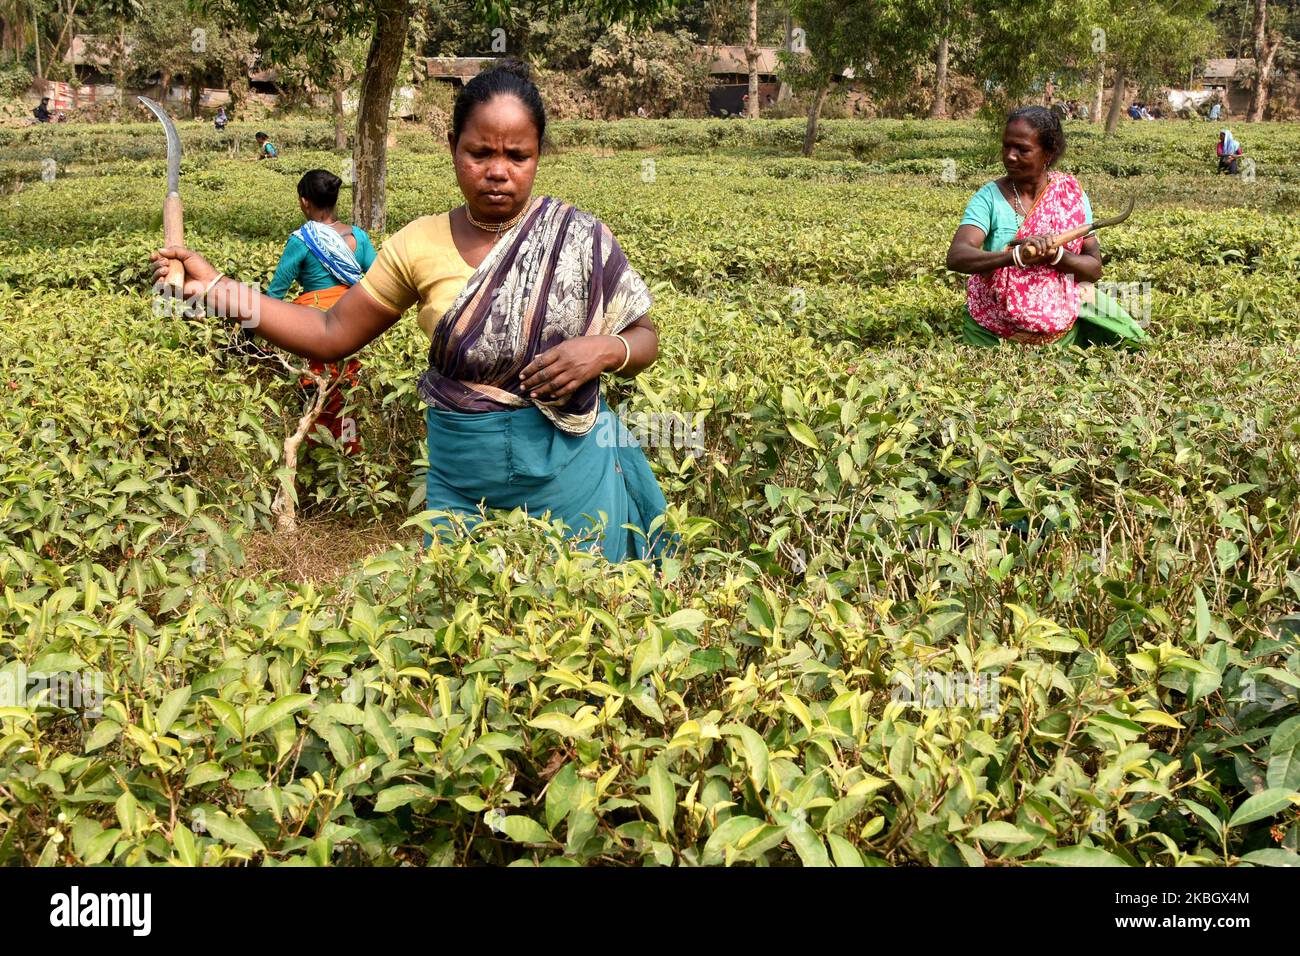 Bangladeshi women working in a tea garden in Sylhet, Bangladesh, on February 11, 2020. Tea Plucking is a specialized skill. Two leaves and a bud need to be plucked in order to get the best taste and profitability. The calculation of daily wage is 75tk(1$) for plucking at least 22-23 kg leaves per day for a worker. The area of Sylhet has over 150 gardens including three of the largest tea gardens in the world both in area and production. Nearly 300,000 workers are employed on the tea estates of which over 75% are women but they are passing their lives as a slave. (Photo by Mamunur Rashid/NurPho Stock Photo